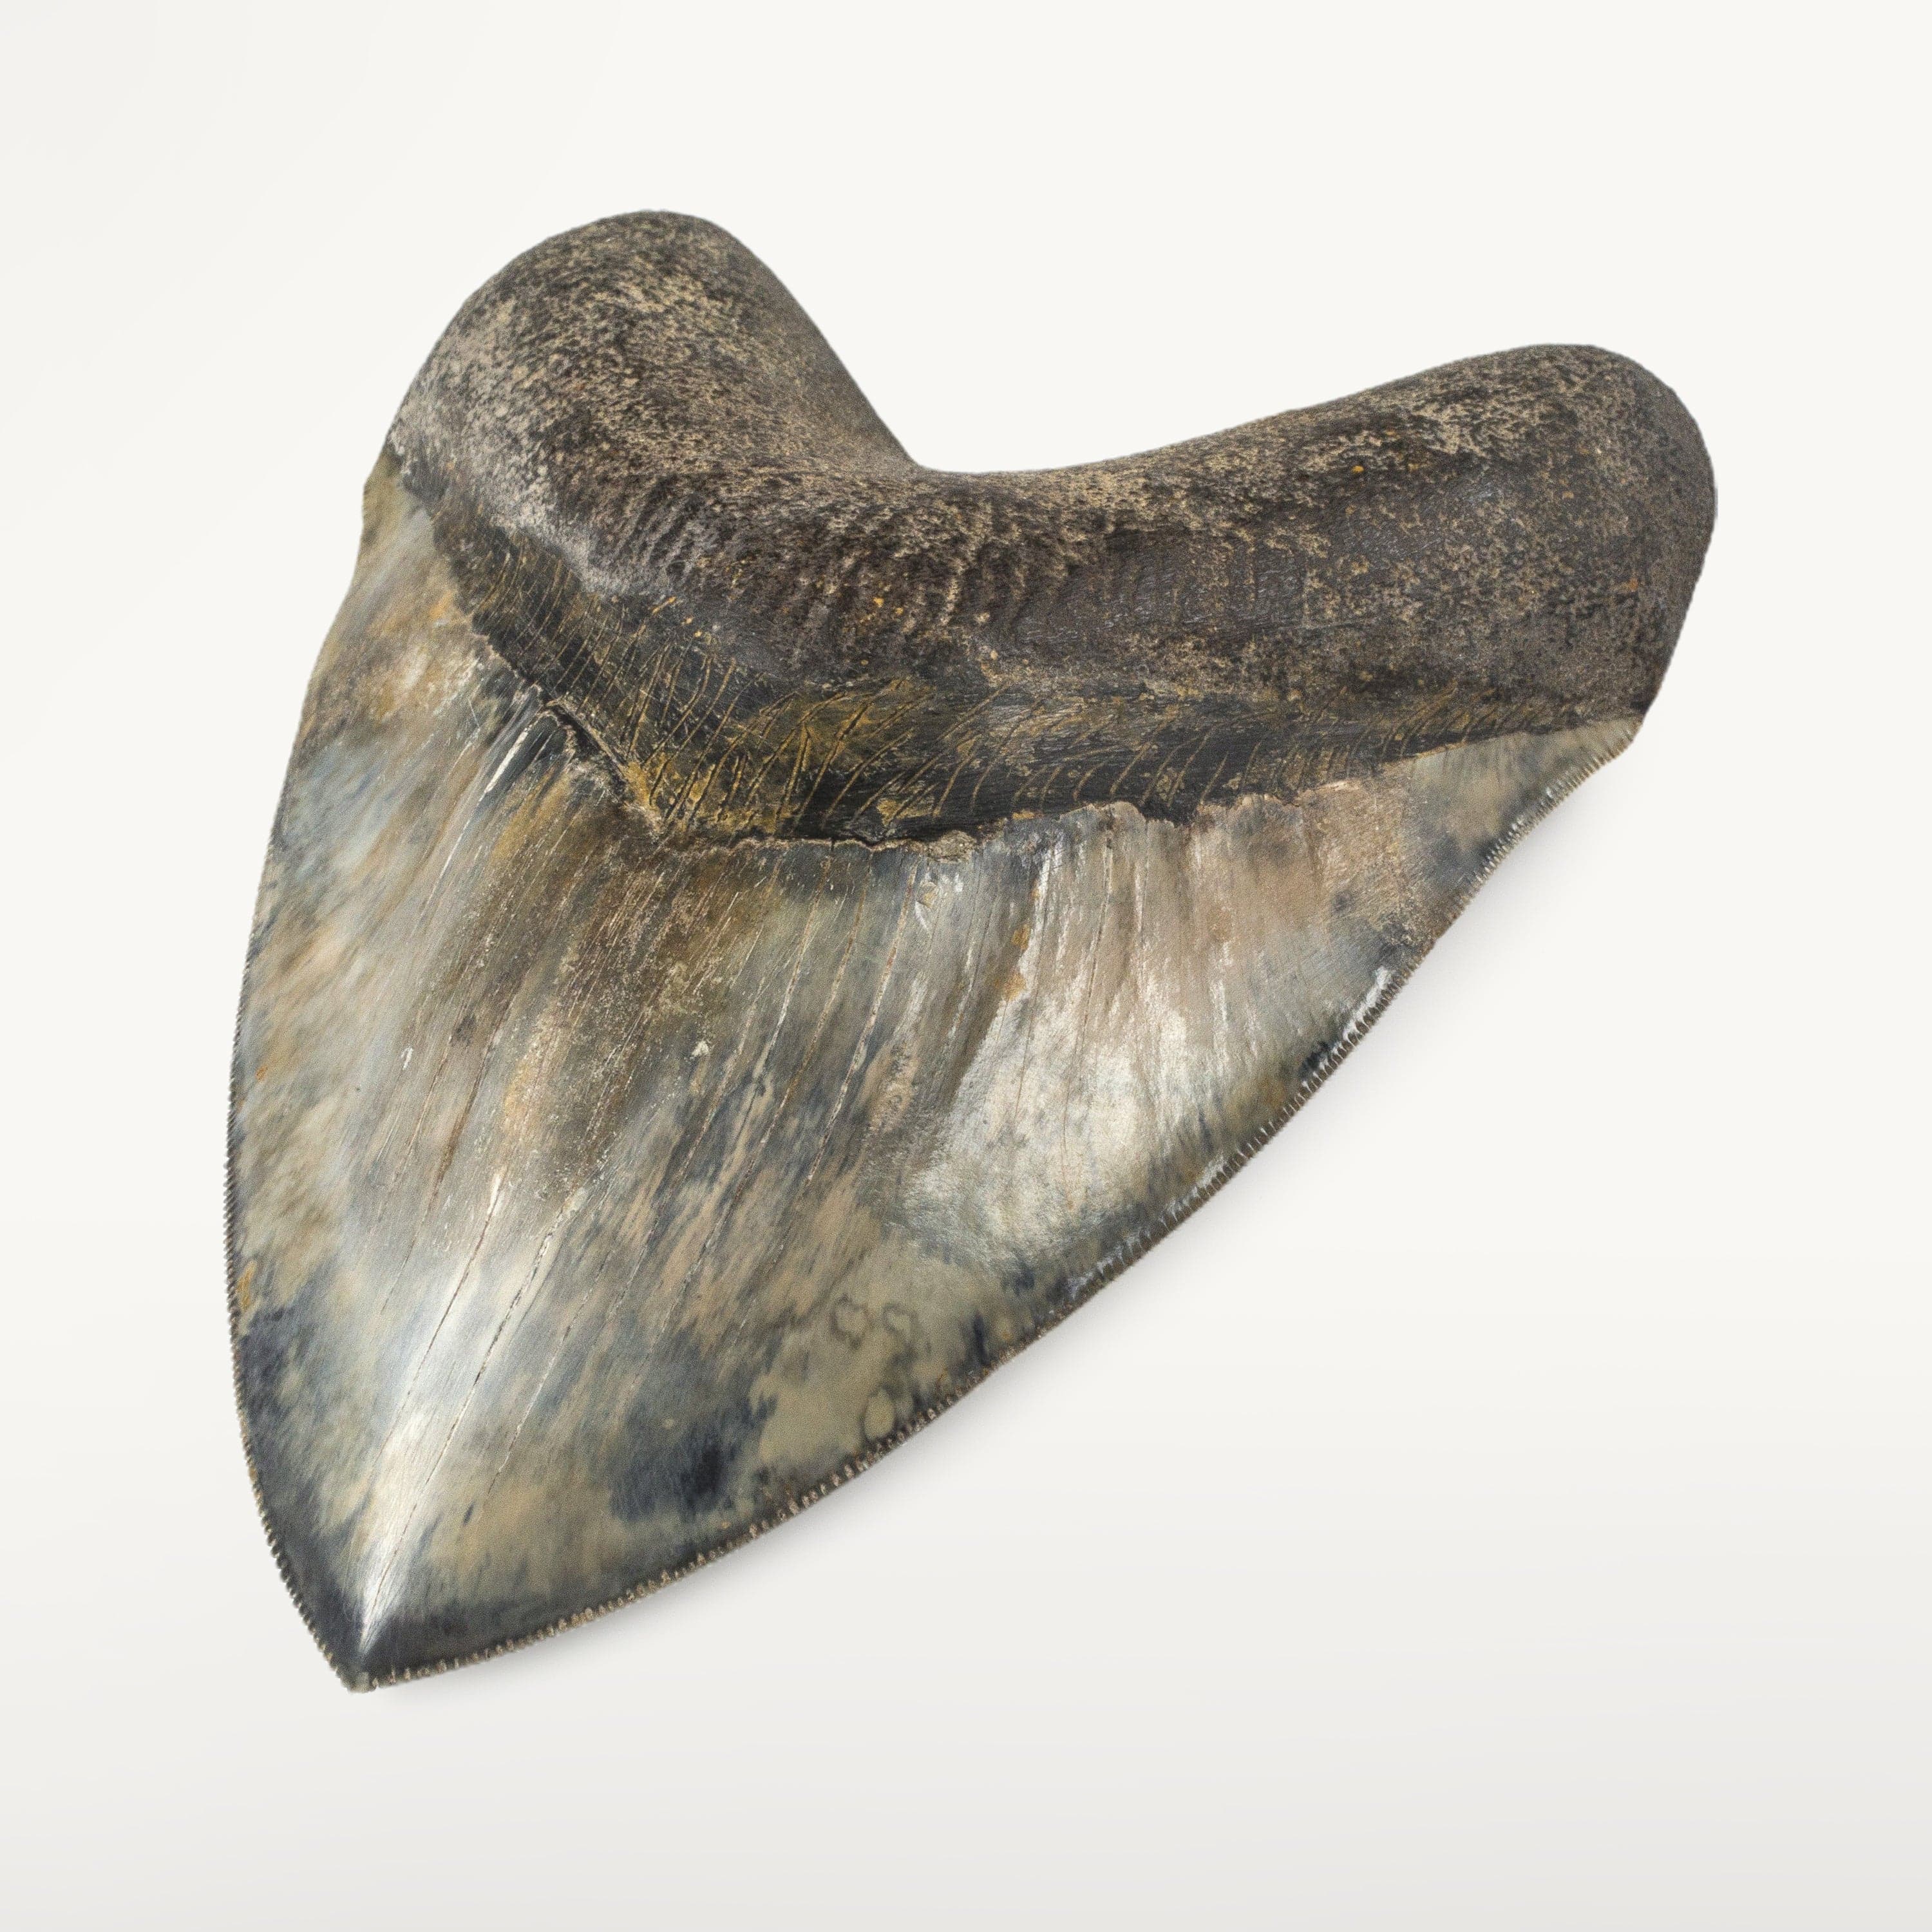 Kalifano Megalodon Teeth Natural Megalodon Tooth from Indonesia - 6.25" ST23000.001